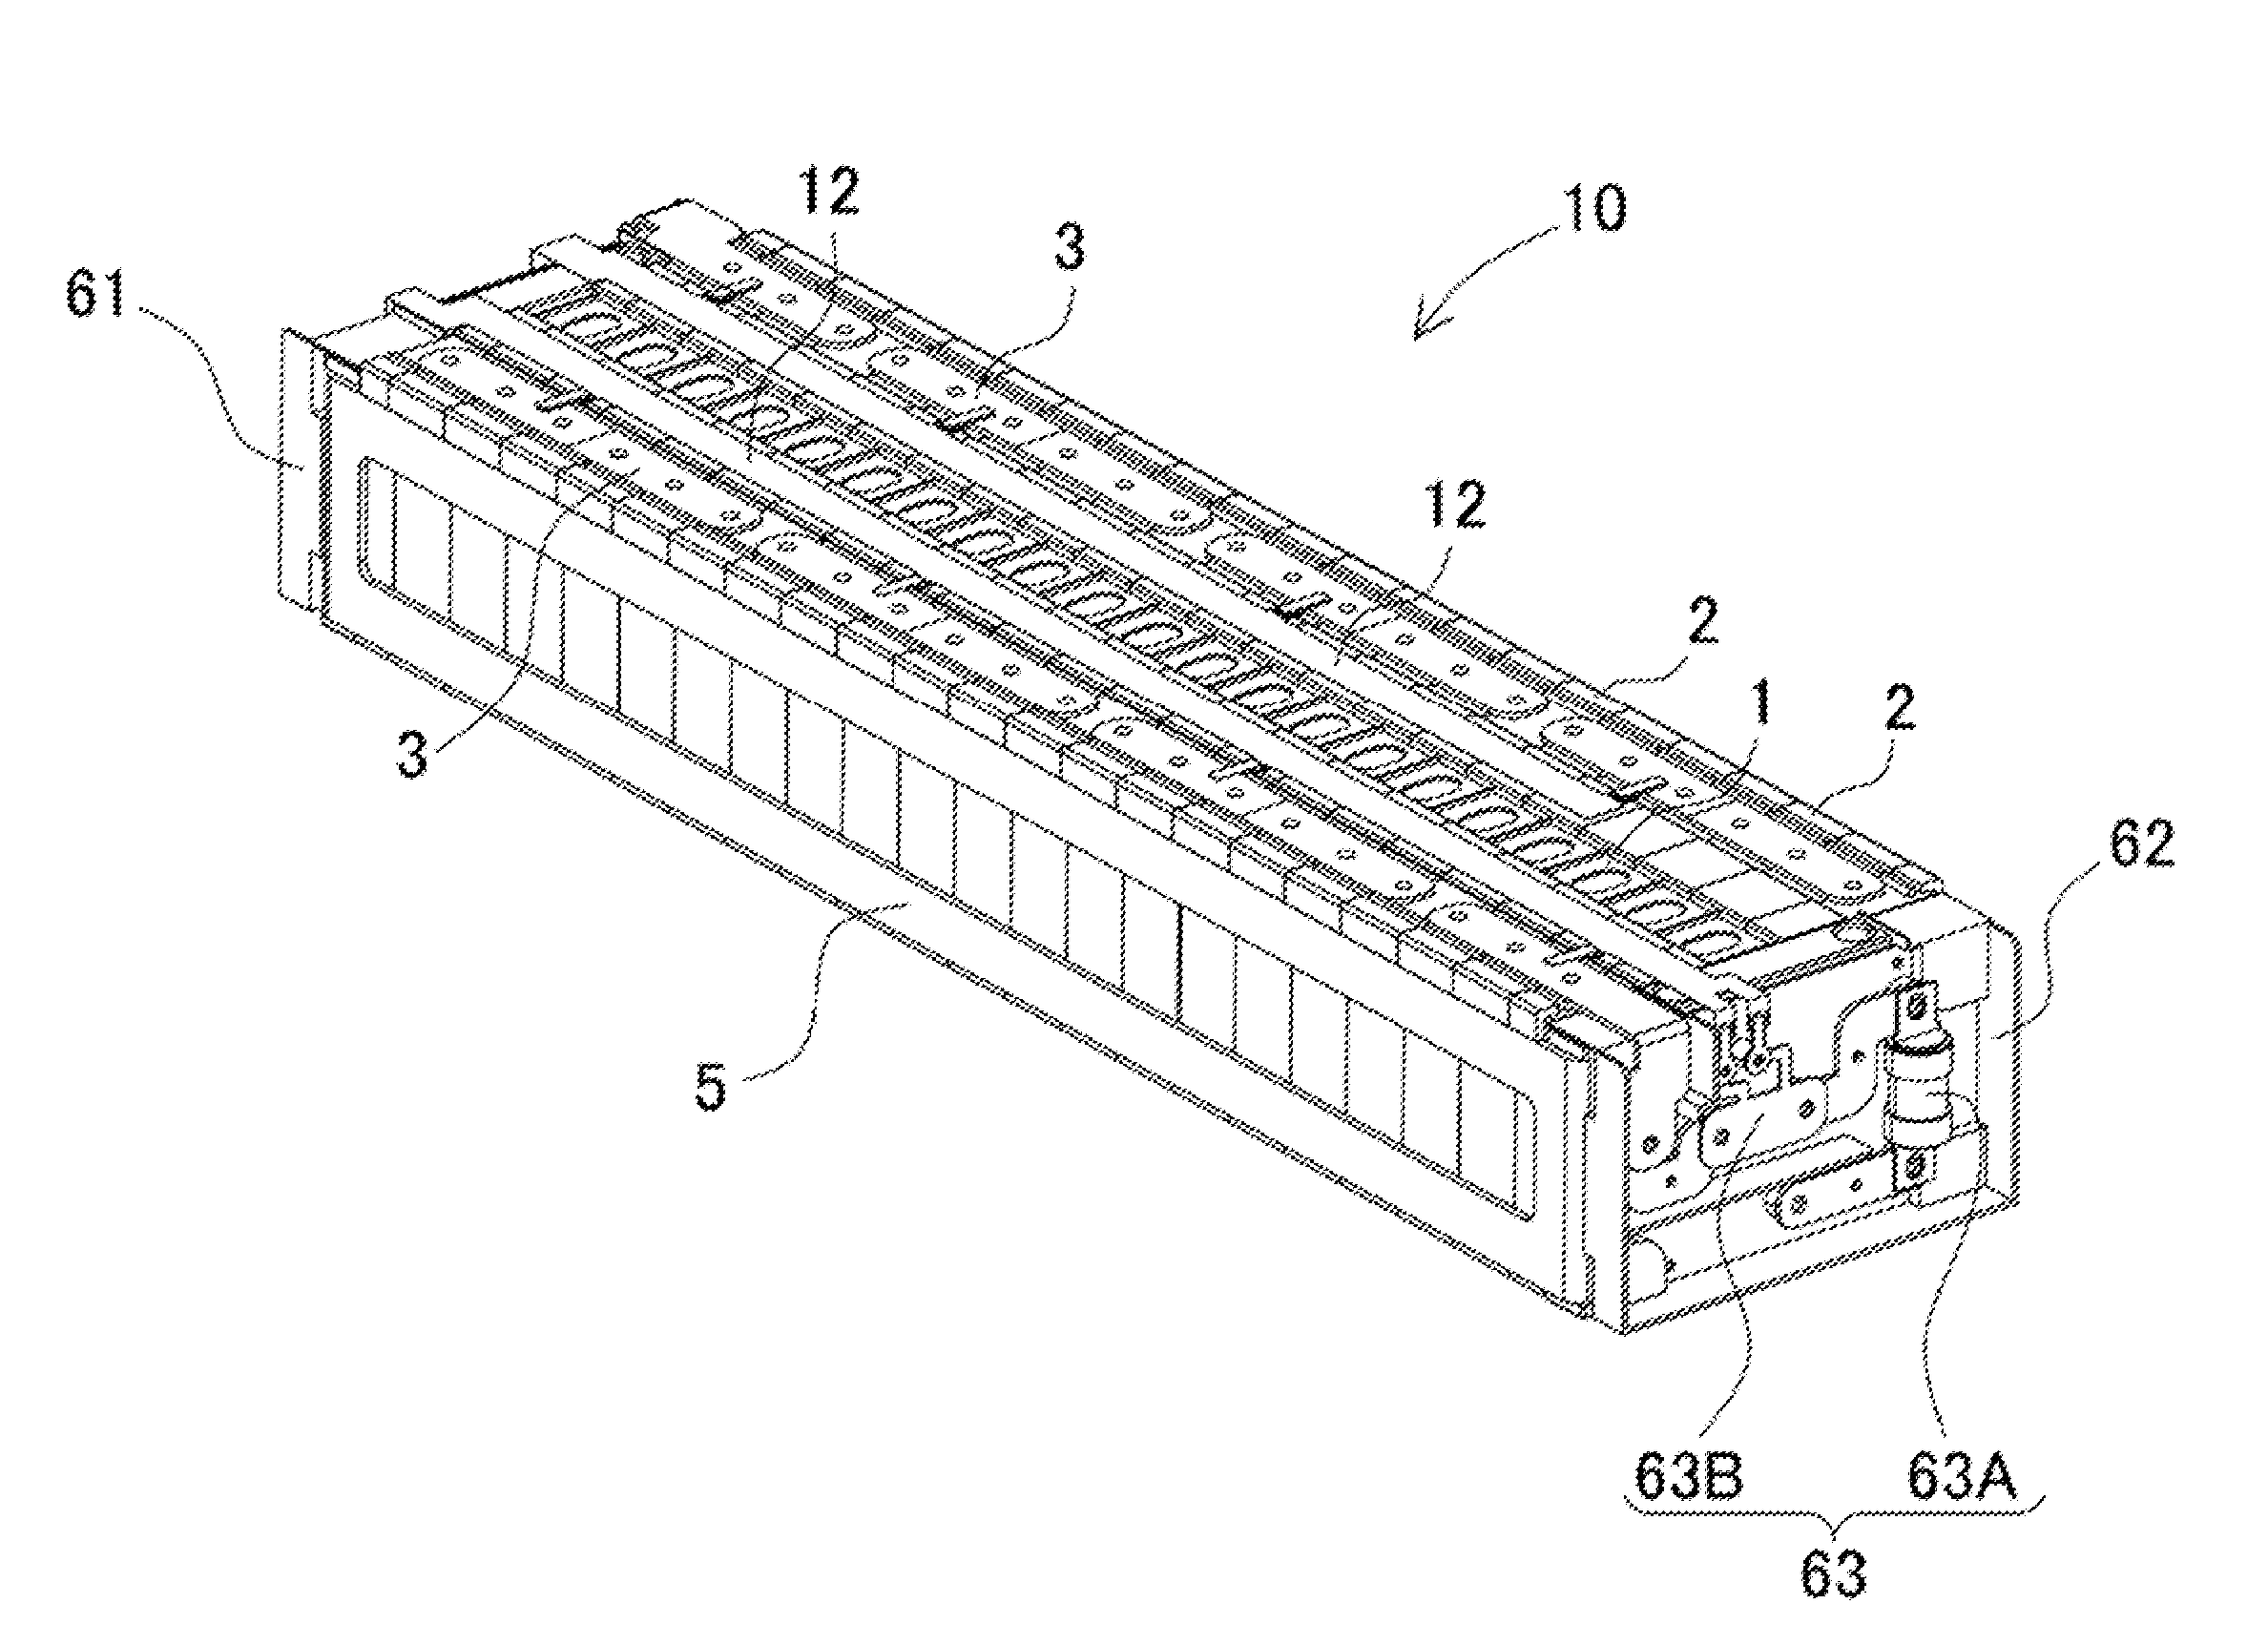 Power source apparatus with electrical components disposed in the battery blocks